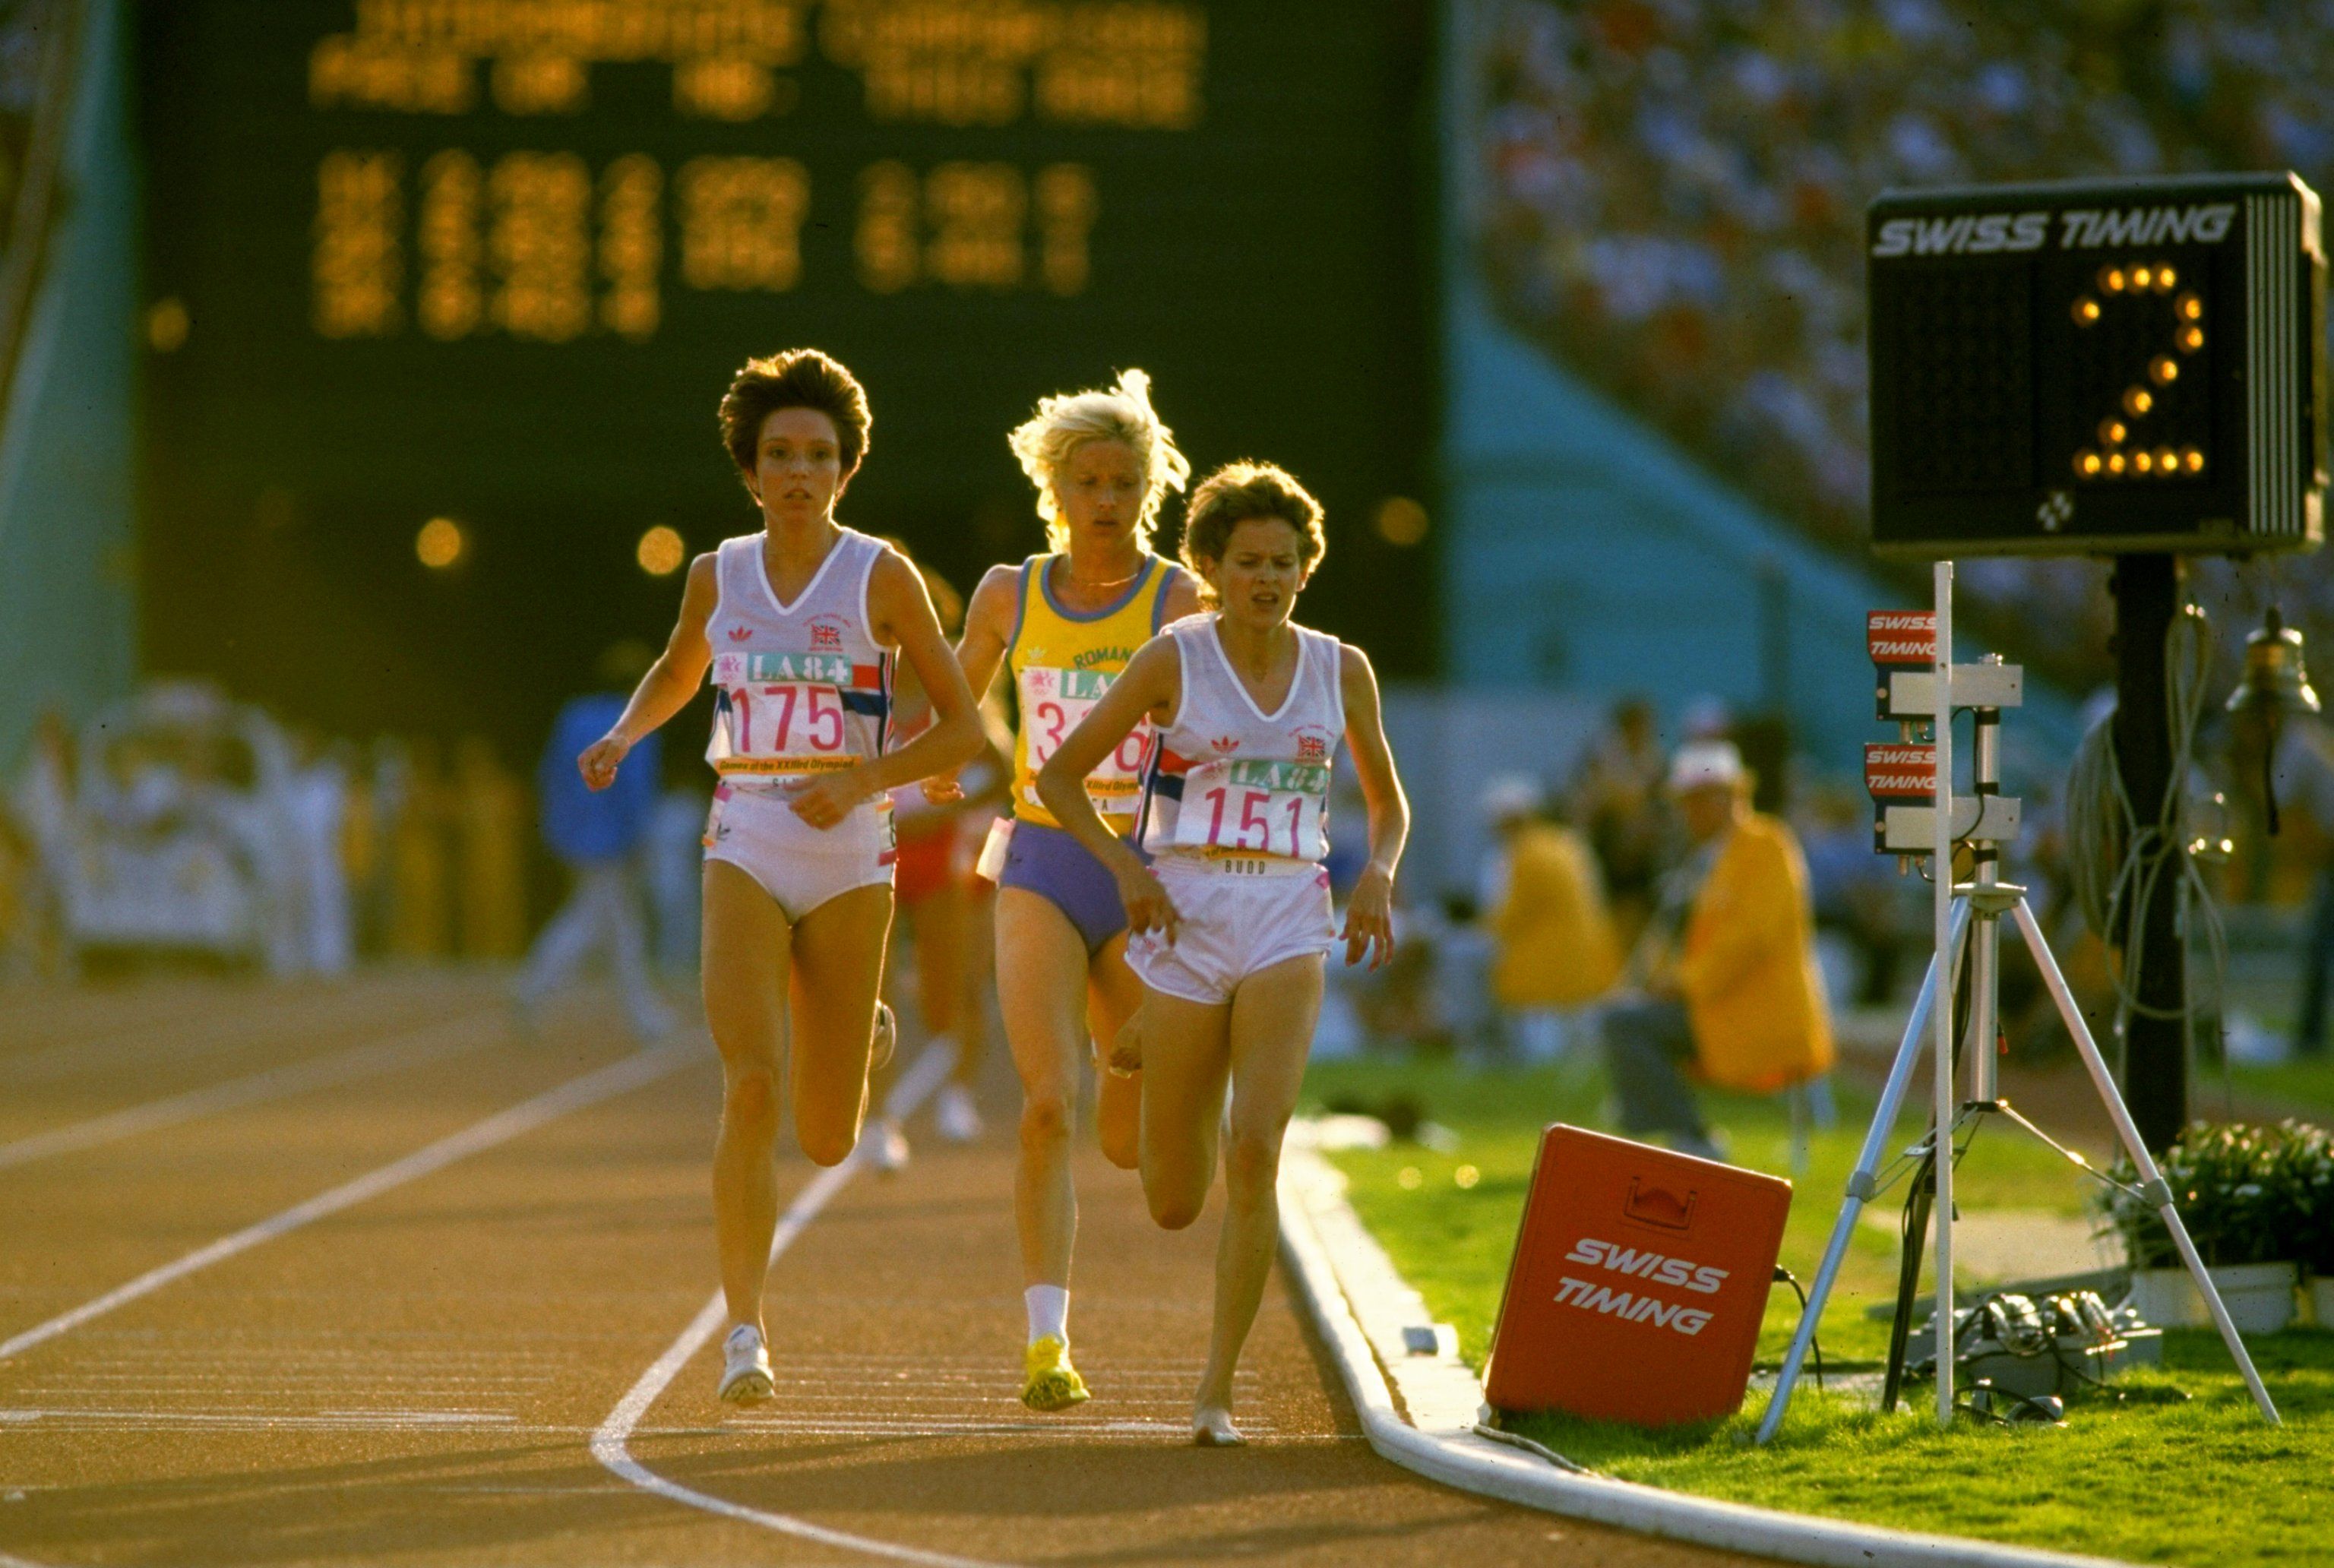 Wendy Sly, Maricica Puica and Zola Budd in the 1984 Olympic 3000m final